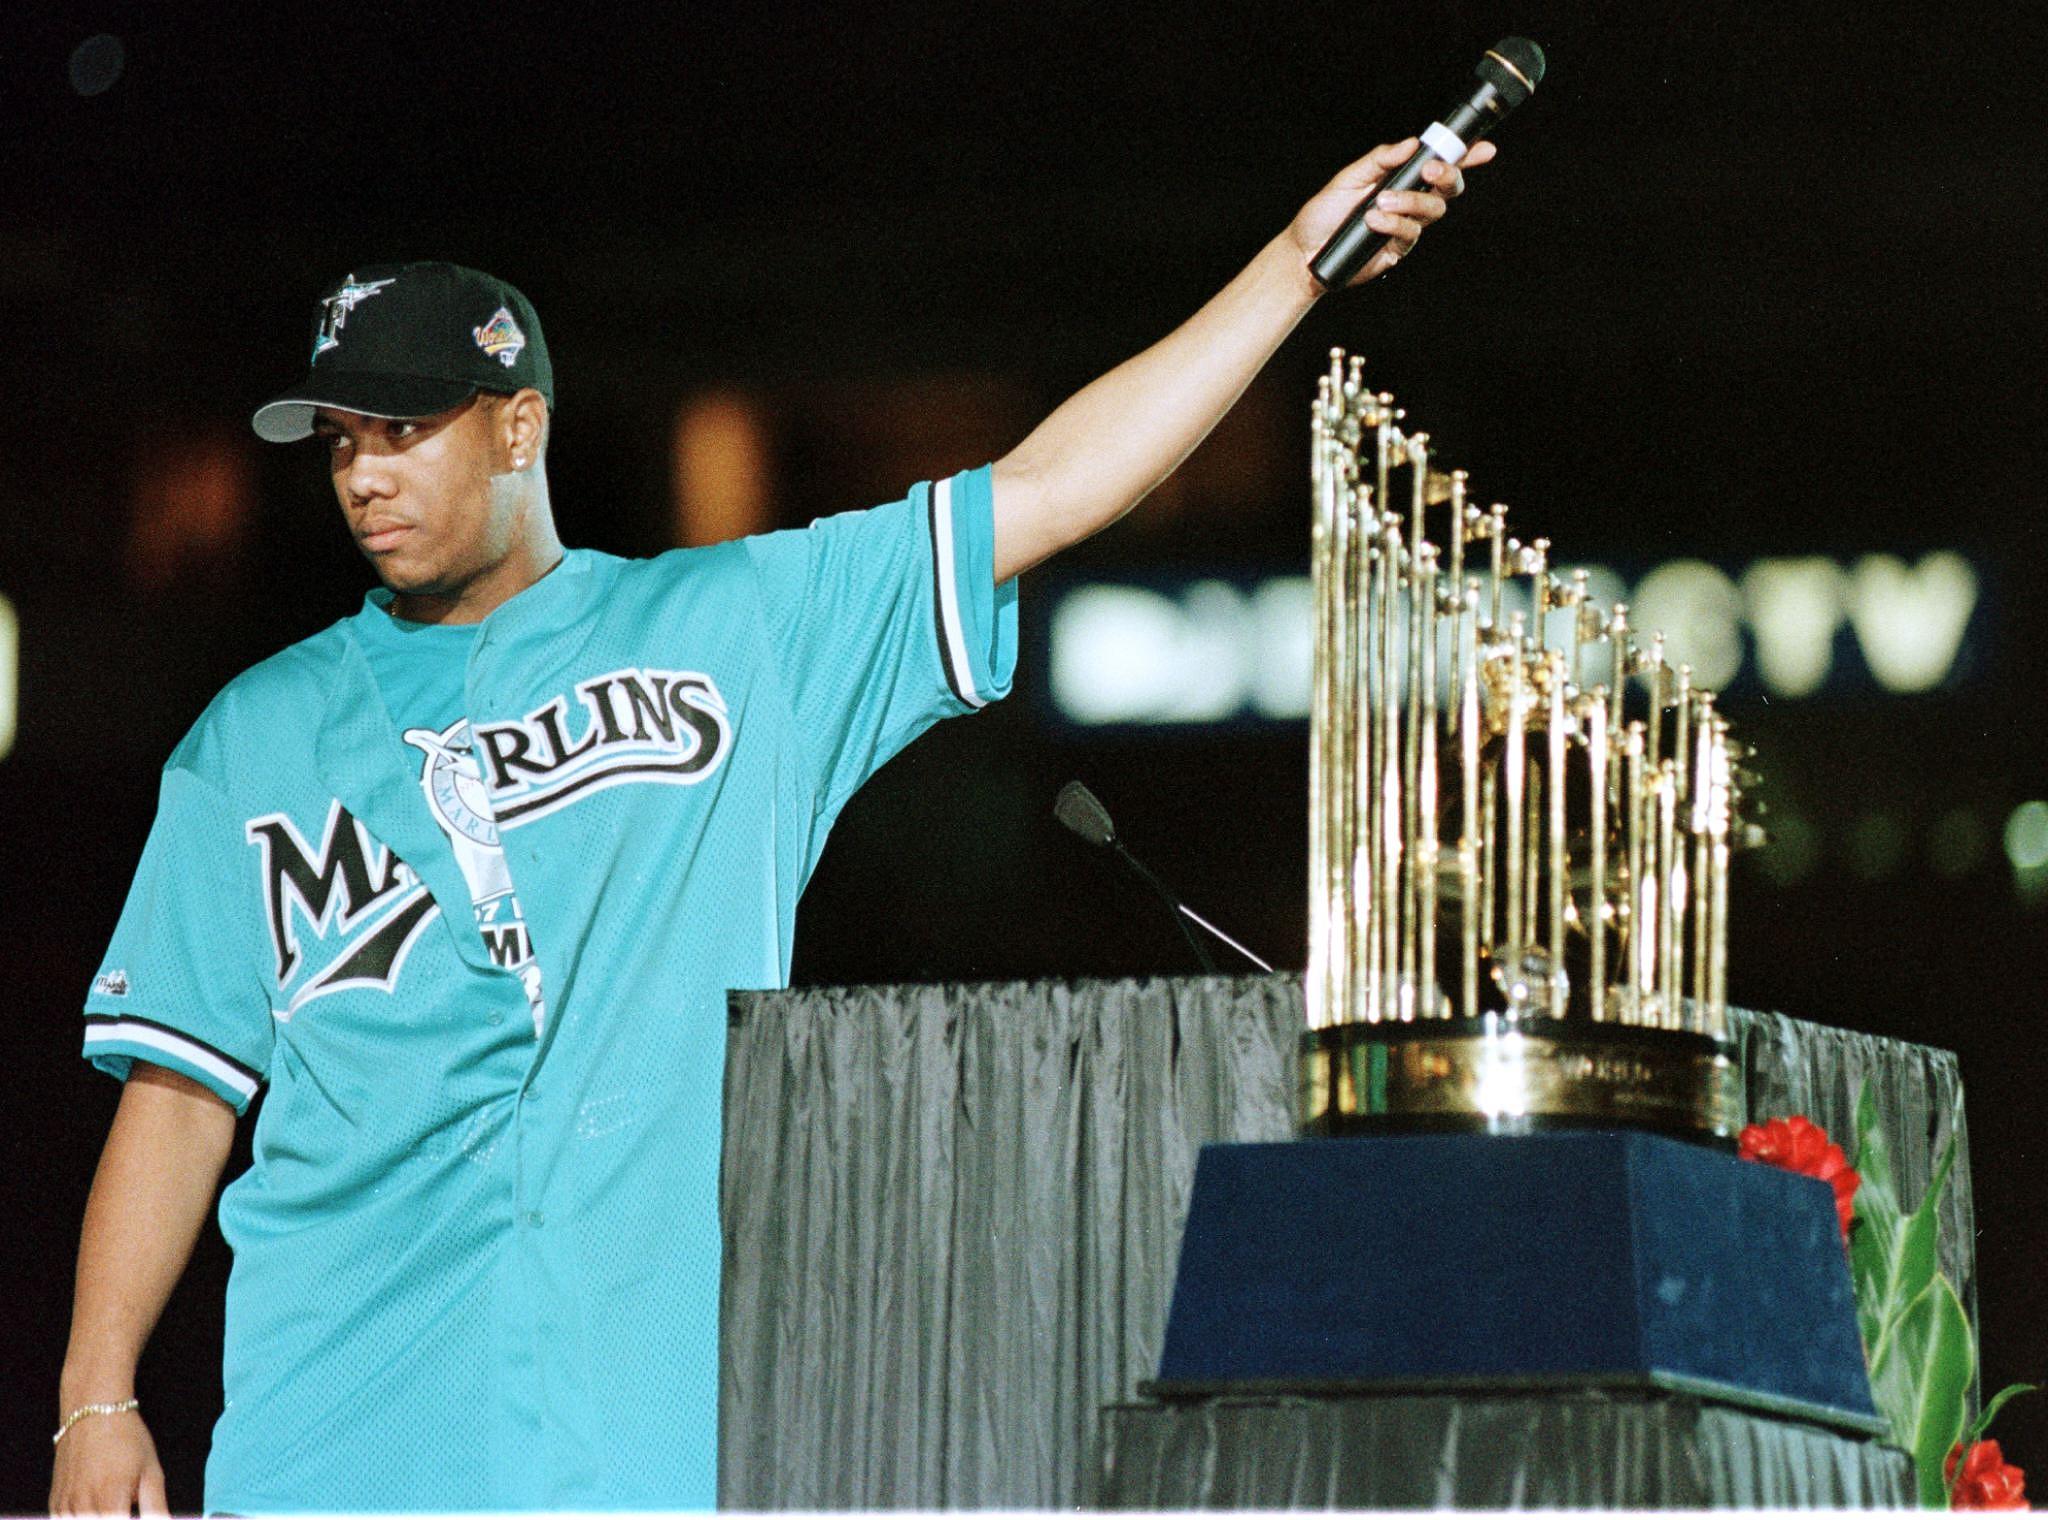 Florida Marlin pitcher and World Series Most Valuable Player Livan Hernandez holds the microphone to the crowd as they cheer at a rally held for the Florida Marlins 28 October at Pro Player Stadium in Miami, Florida. The Marlins Beat the Cleveland Indians of the American League in a best of seven-series